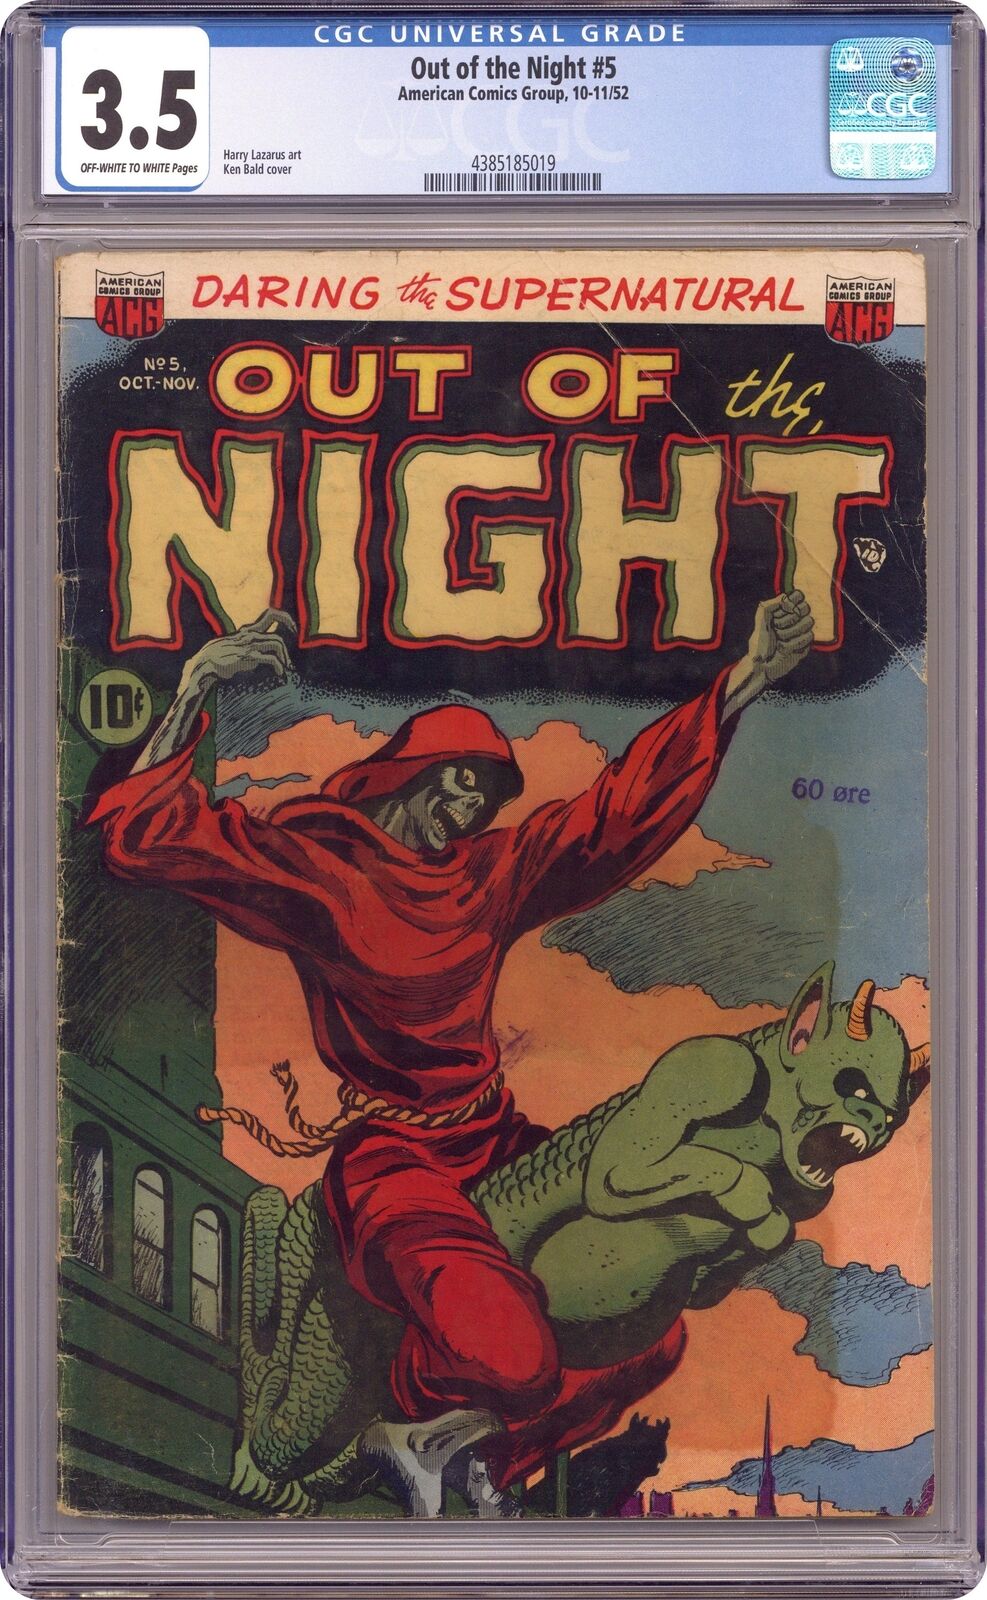 Out of the Night #5 CGC 3.5 1952 4385185019